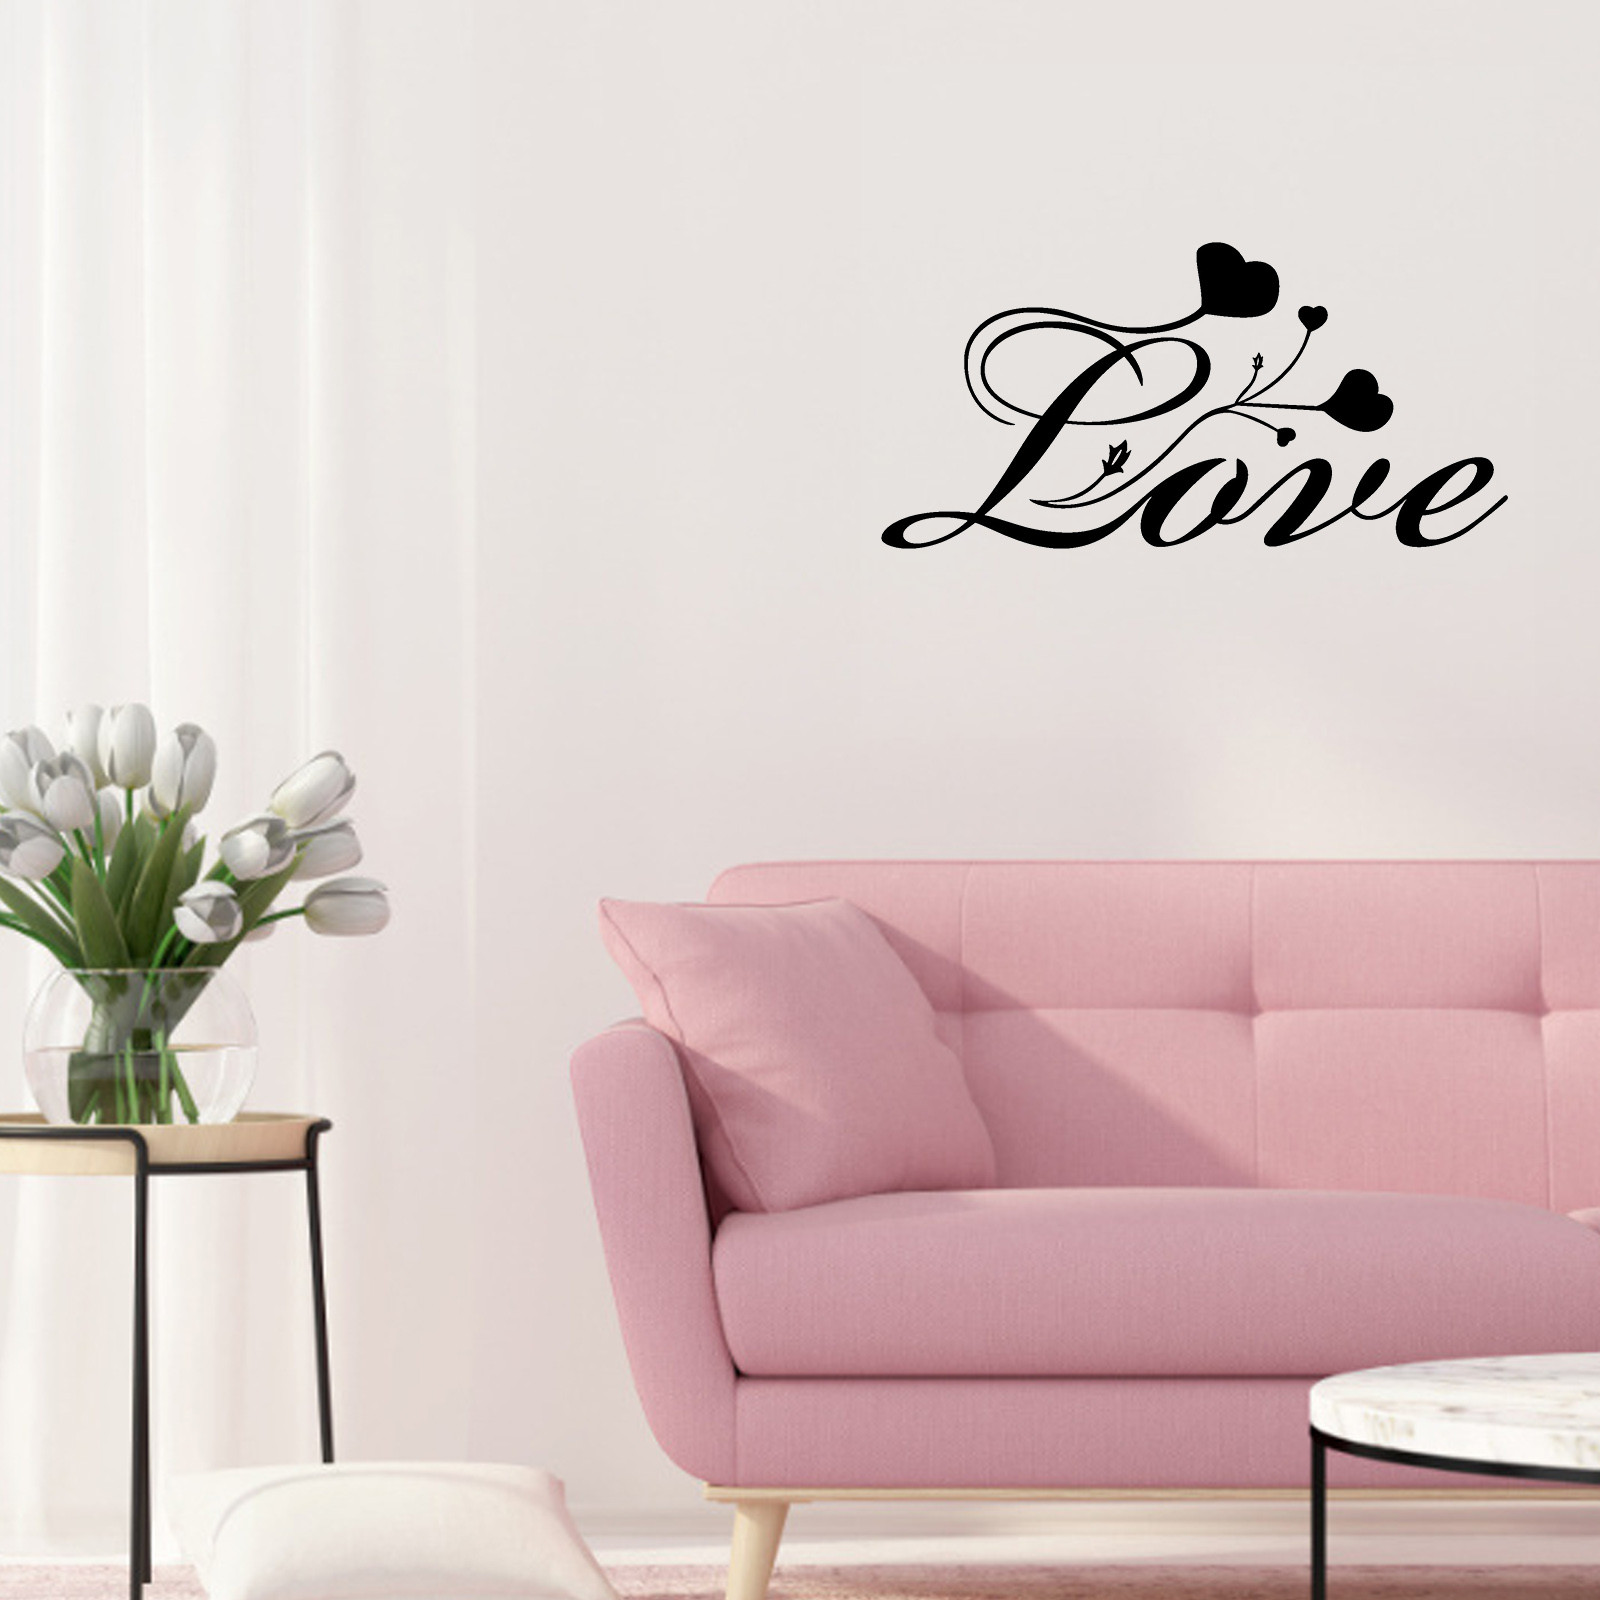 Kitchen Wall Sticker Home Decor Valentine's Day Decals Stickers for House Decoration Accessories Mural Wallpaper Poster D11